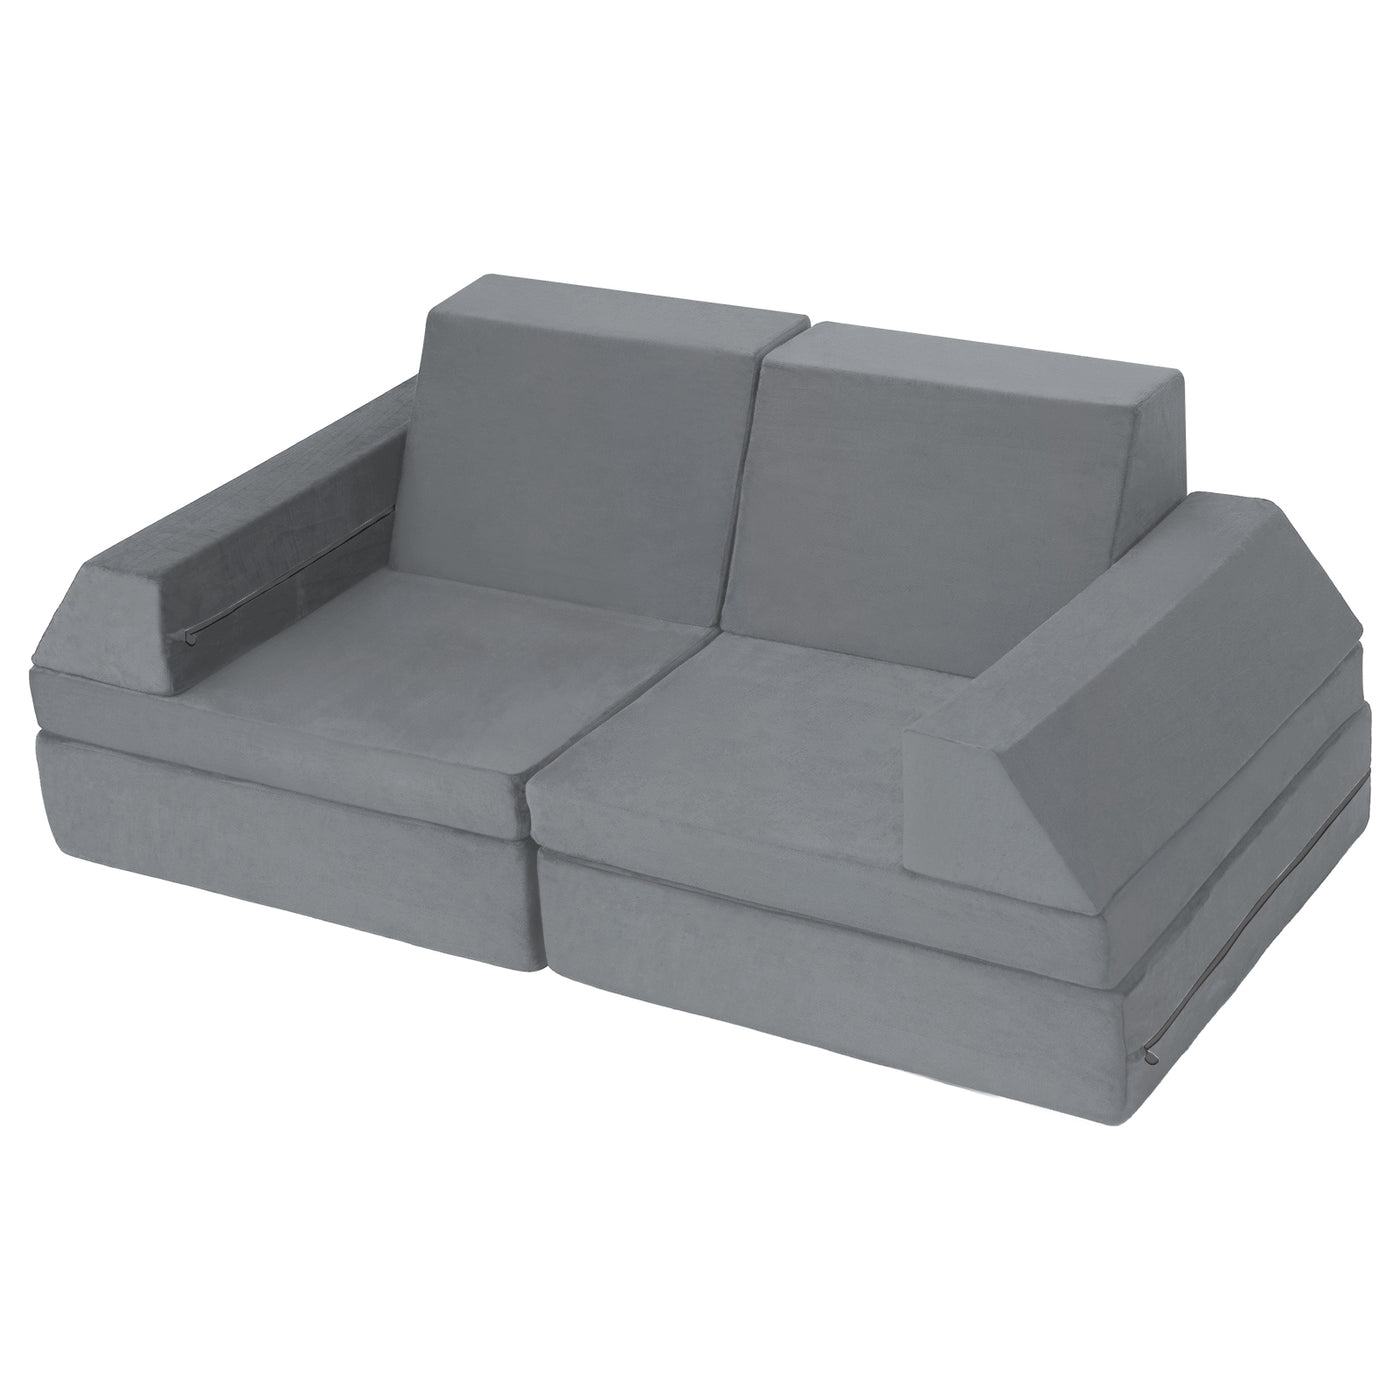 10-Piece Modular Convertible Kids Play Couch Sofa Set with Removable Velvet Covers (Grey)